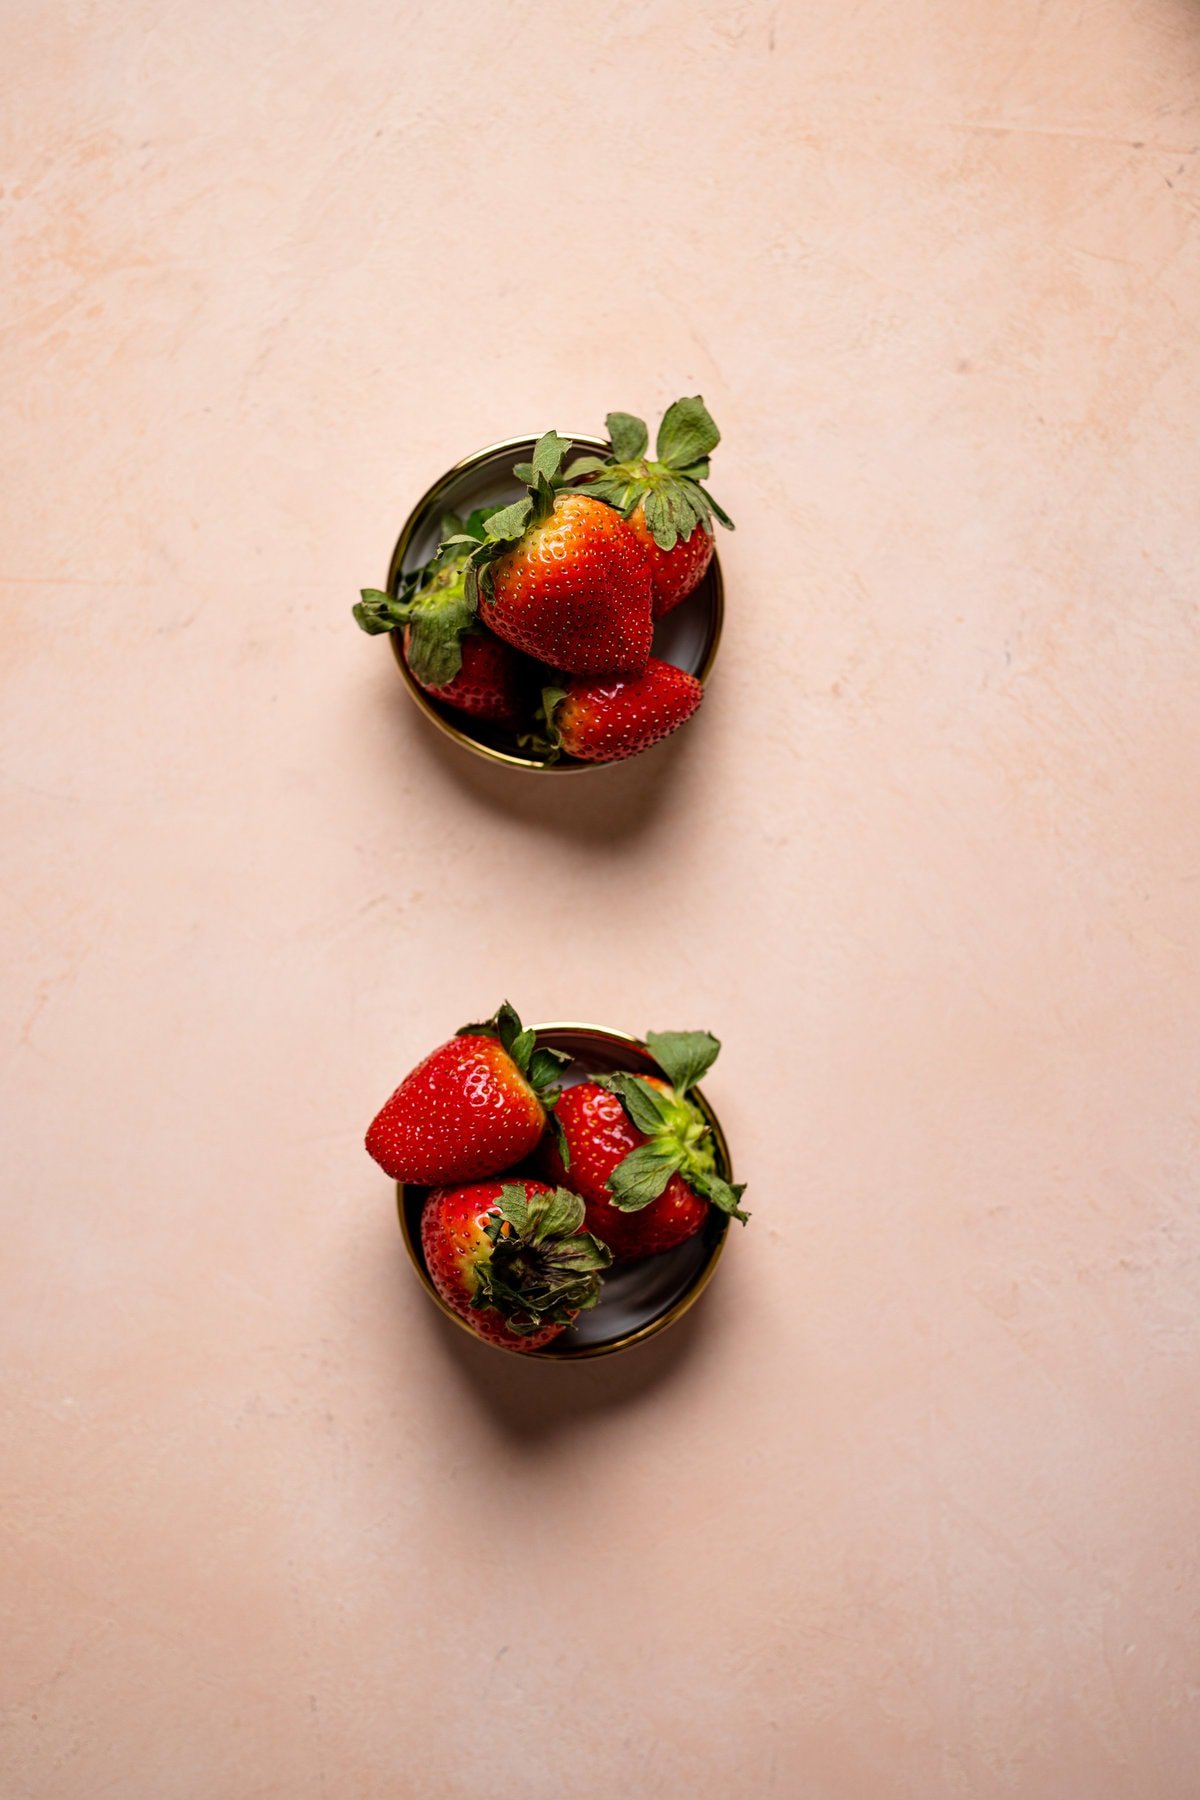 Two sets of strawberries